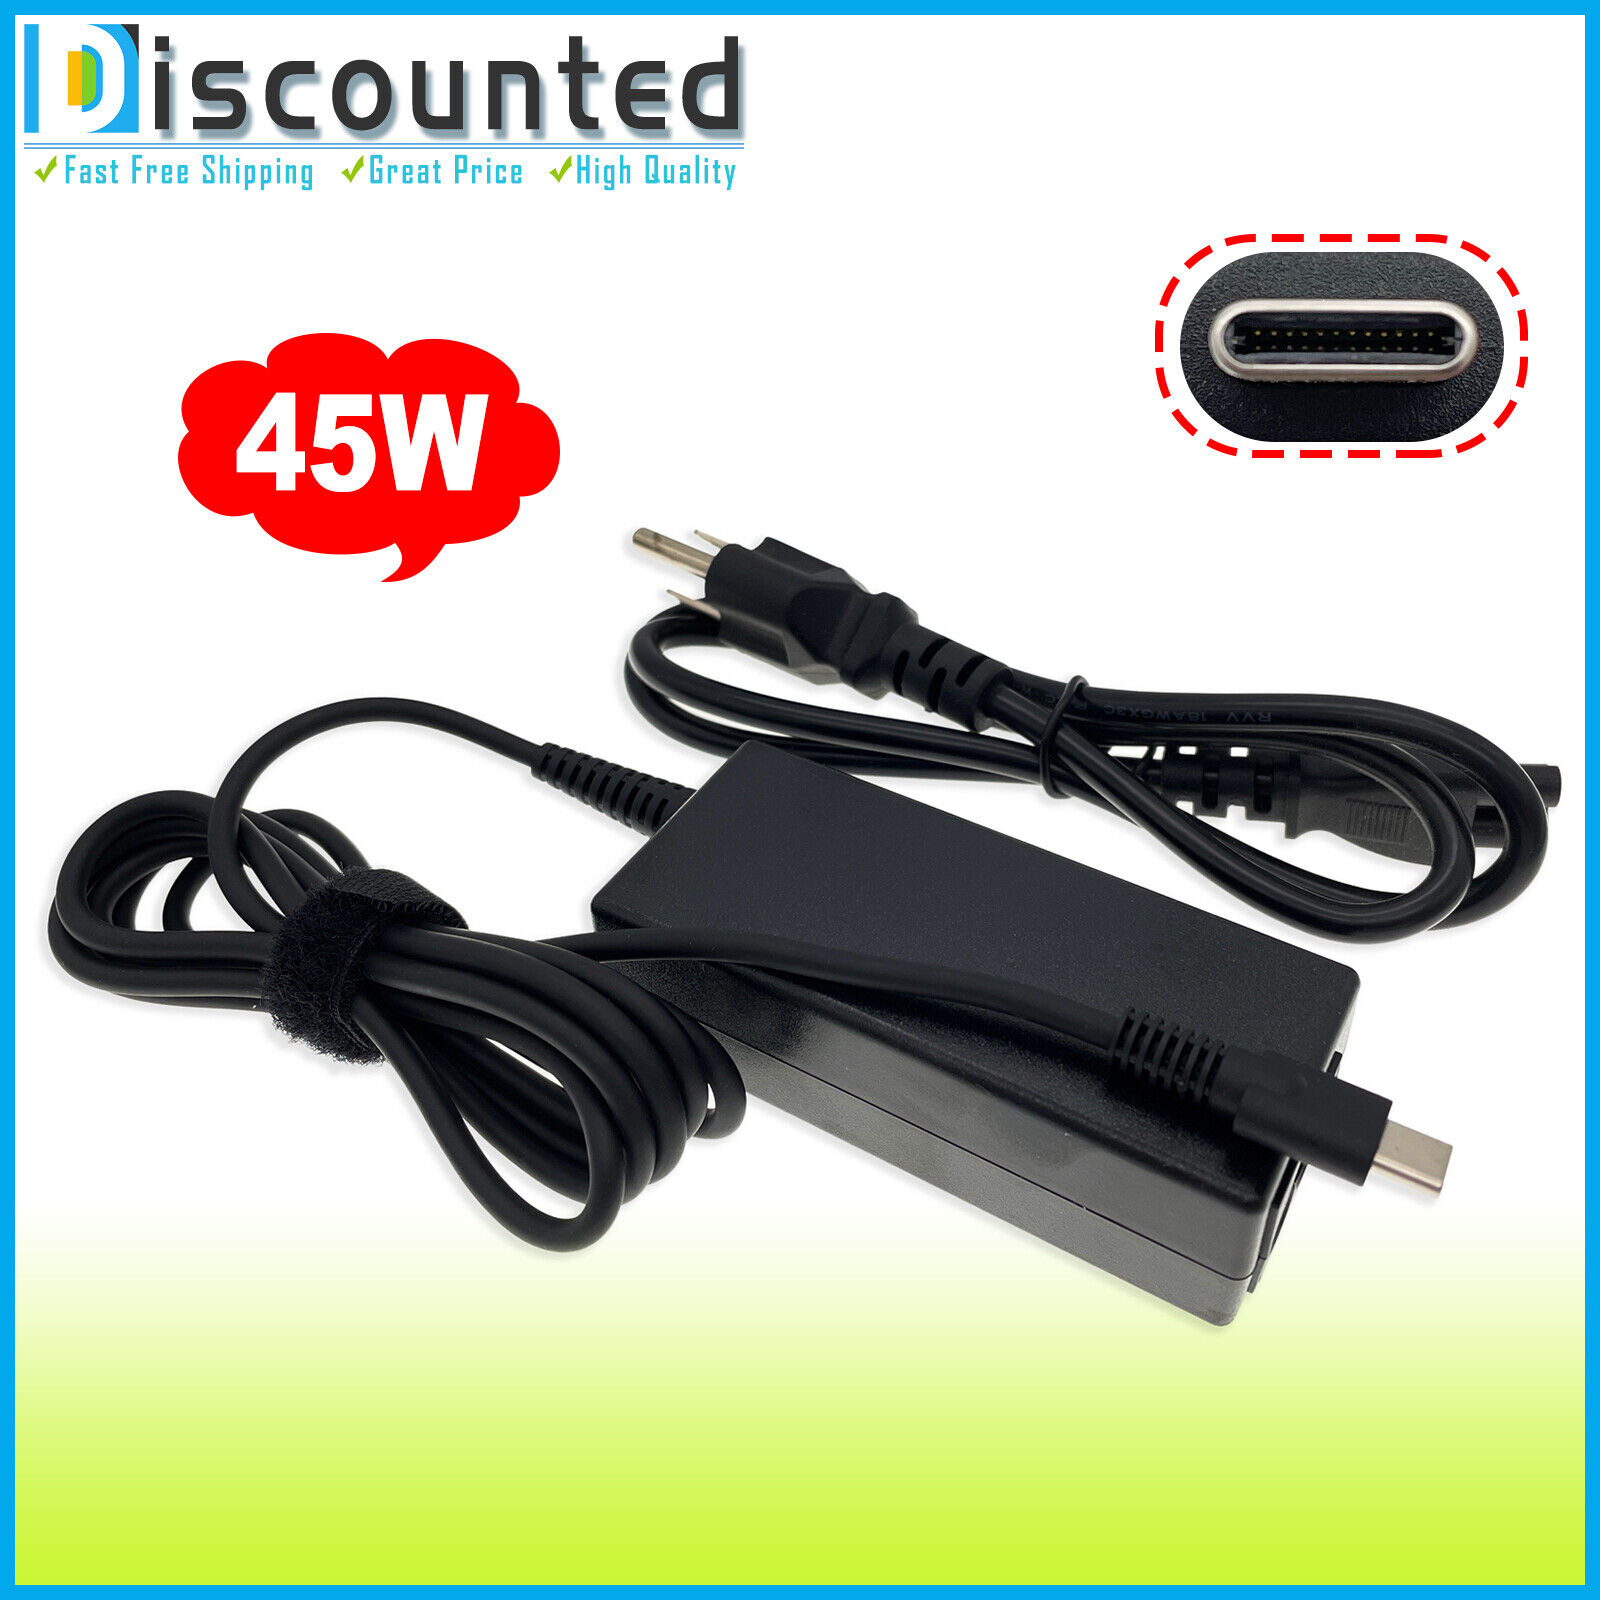 New 45W Type-C AC Adapter Charger For Lenovo 100E 2nd Gen 81QB000AUS Chromebook